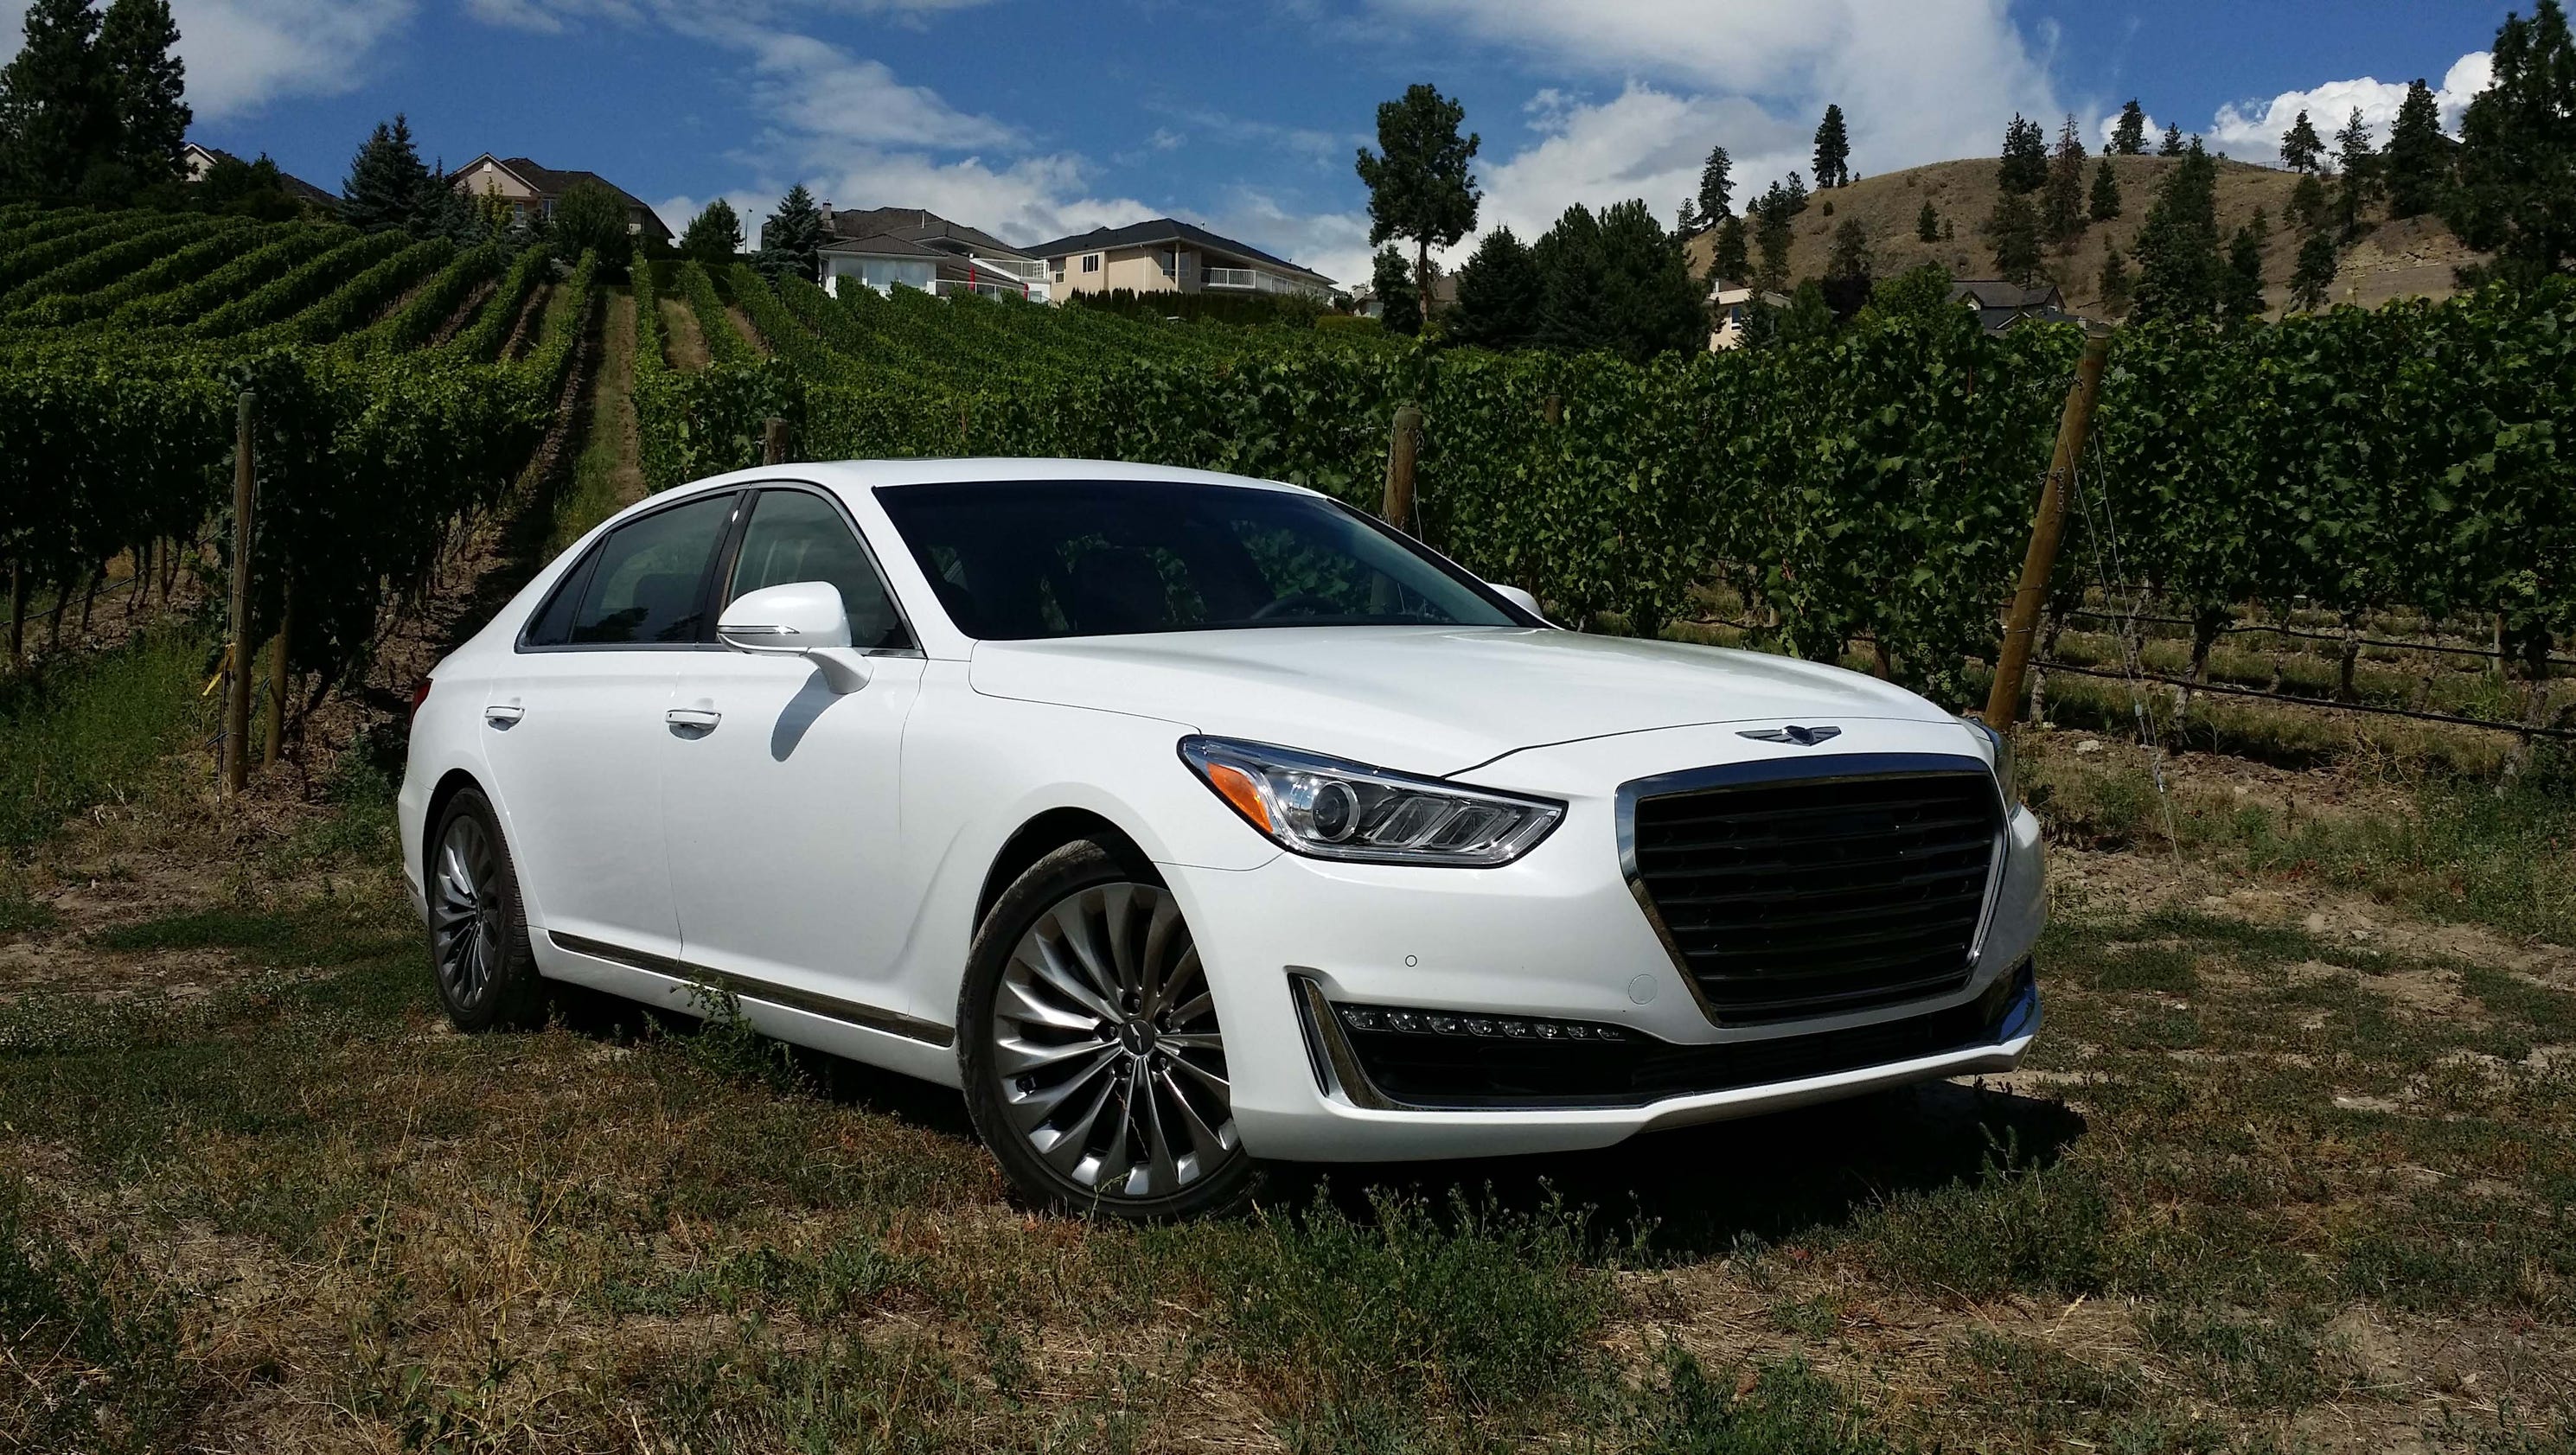 2017 Hyundai Genesis G90 with every amenity possible